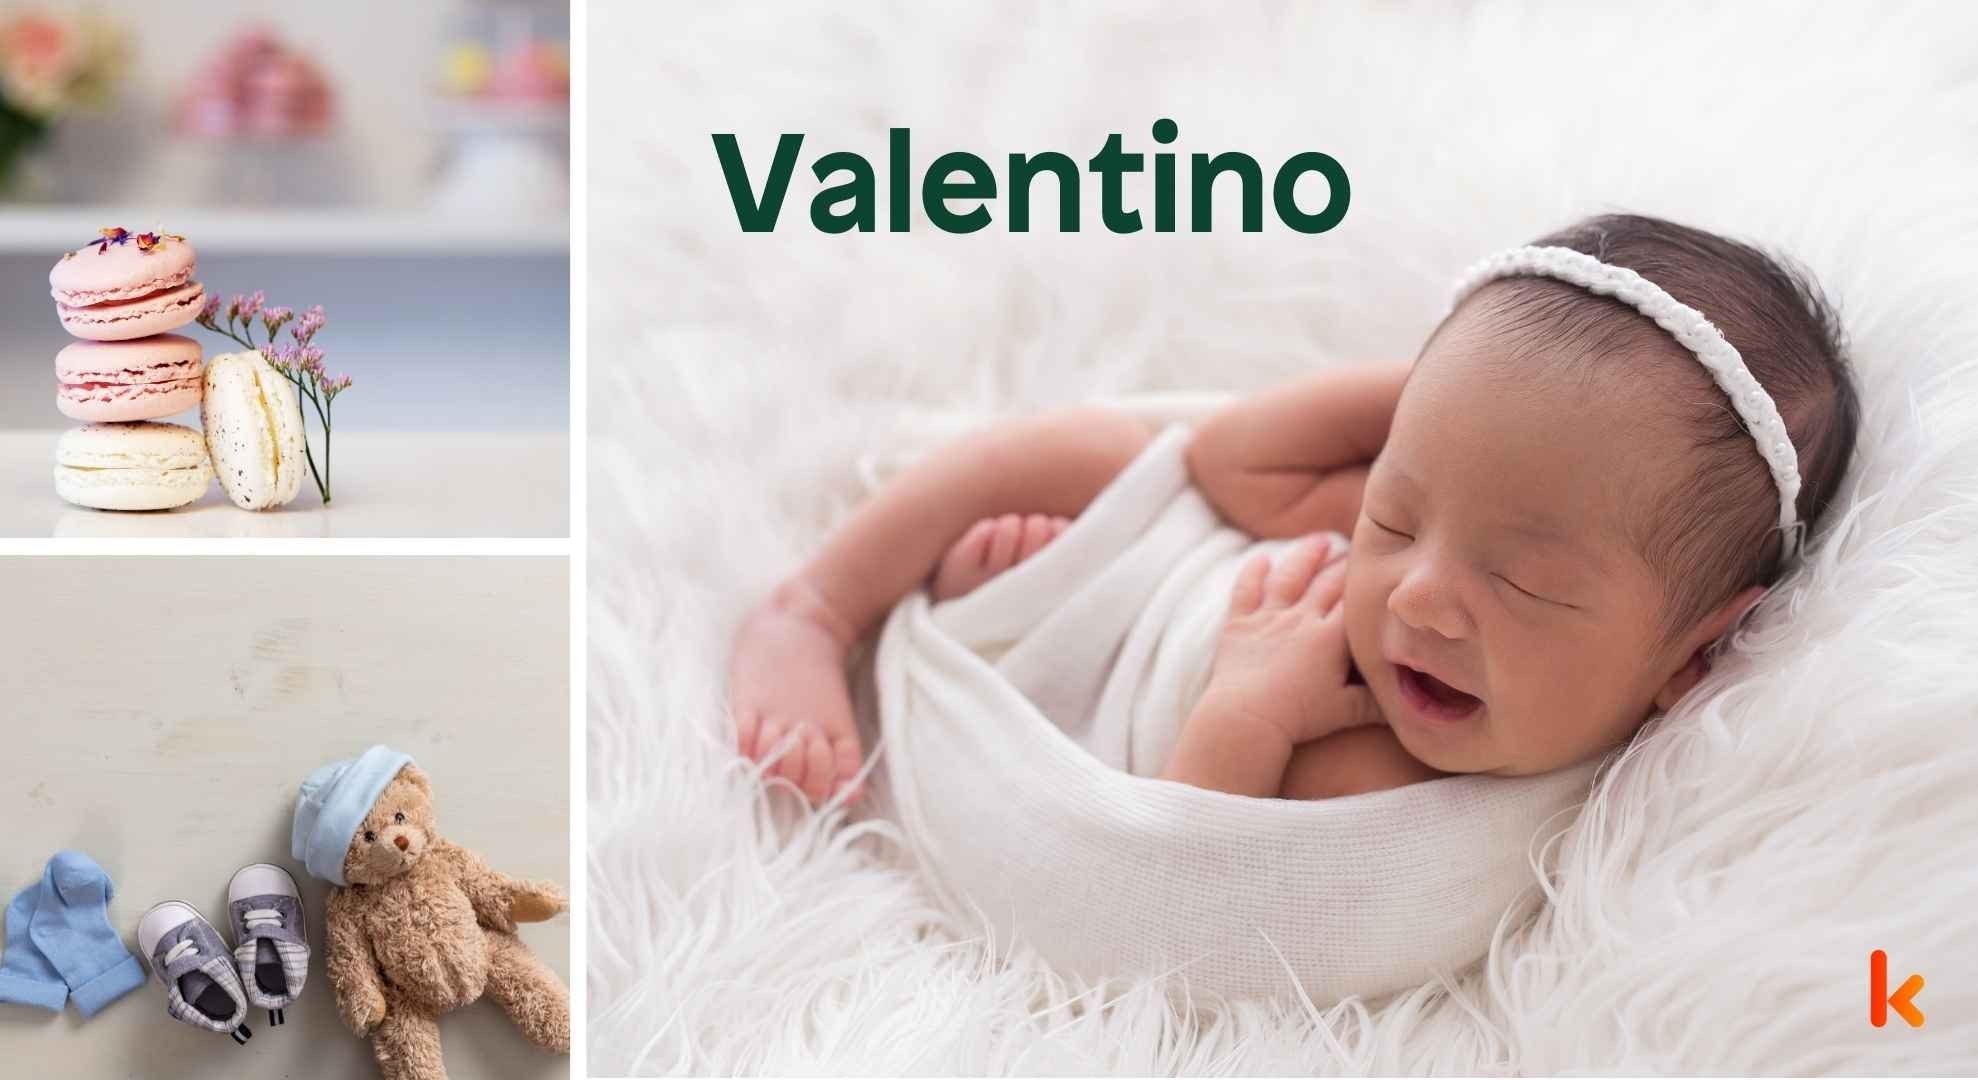 Meaning of the name Valentino